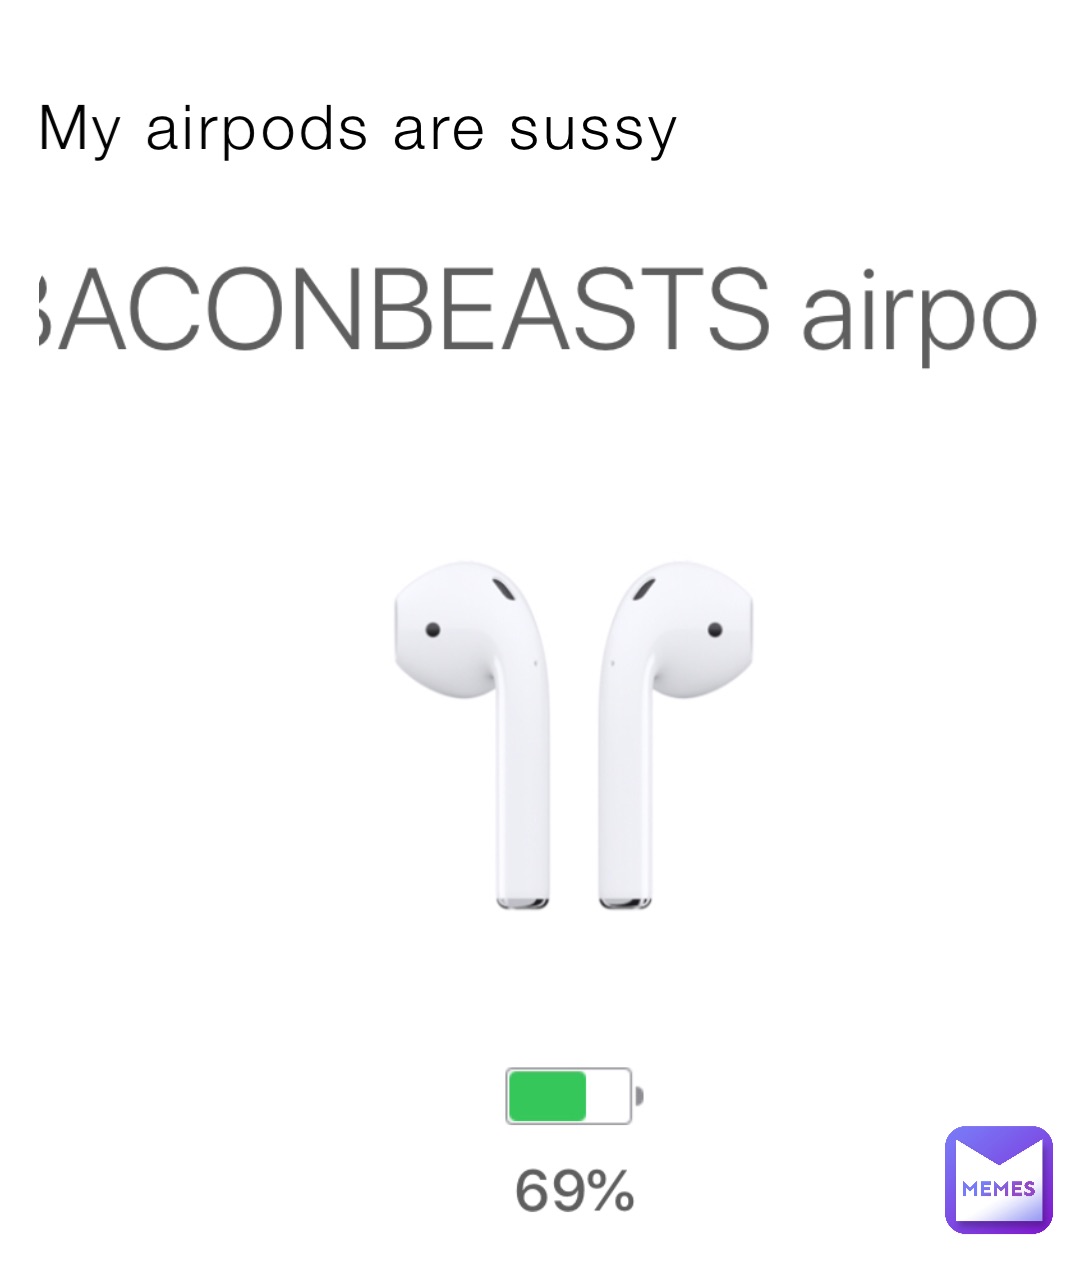 My airpods are sussy